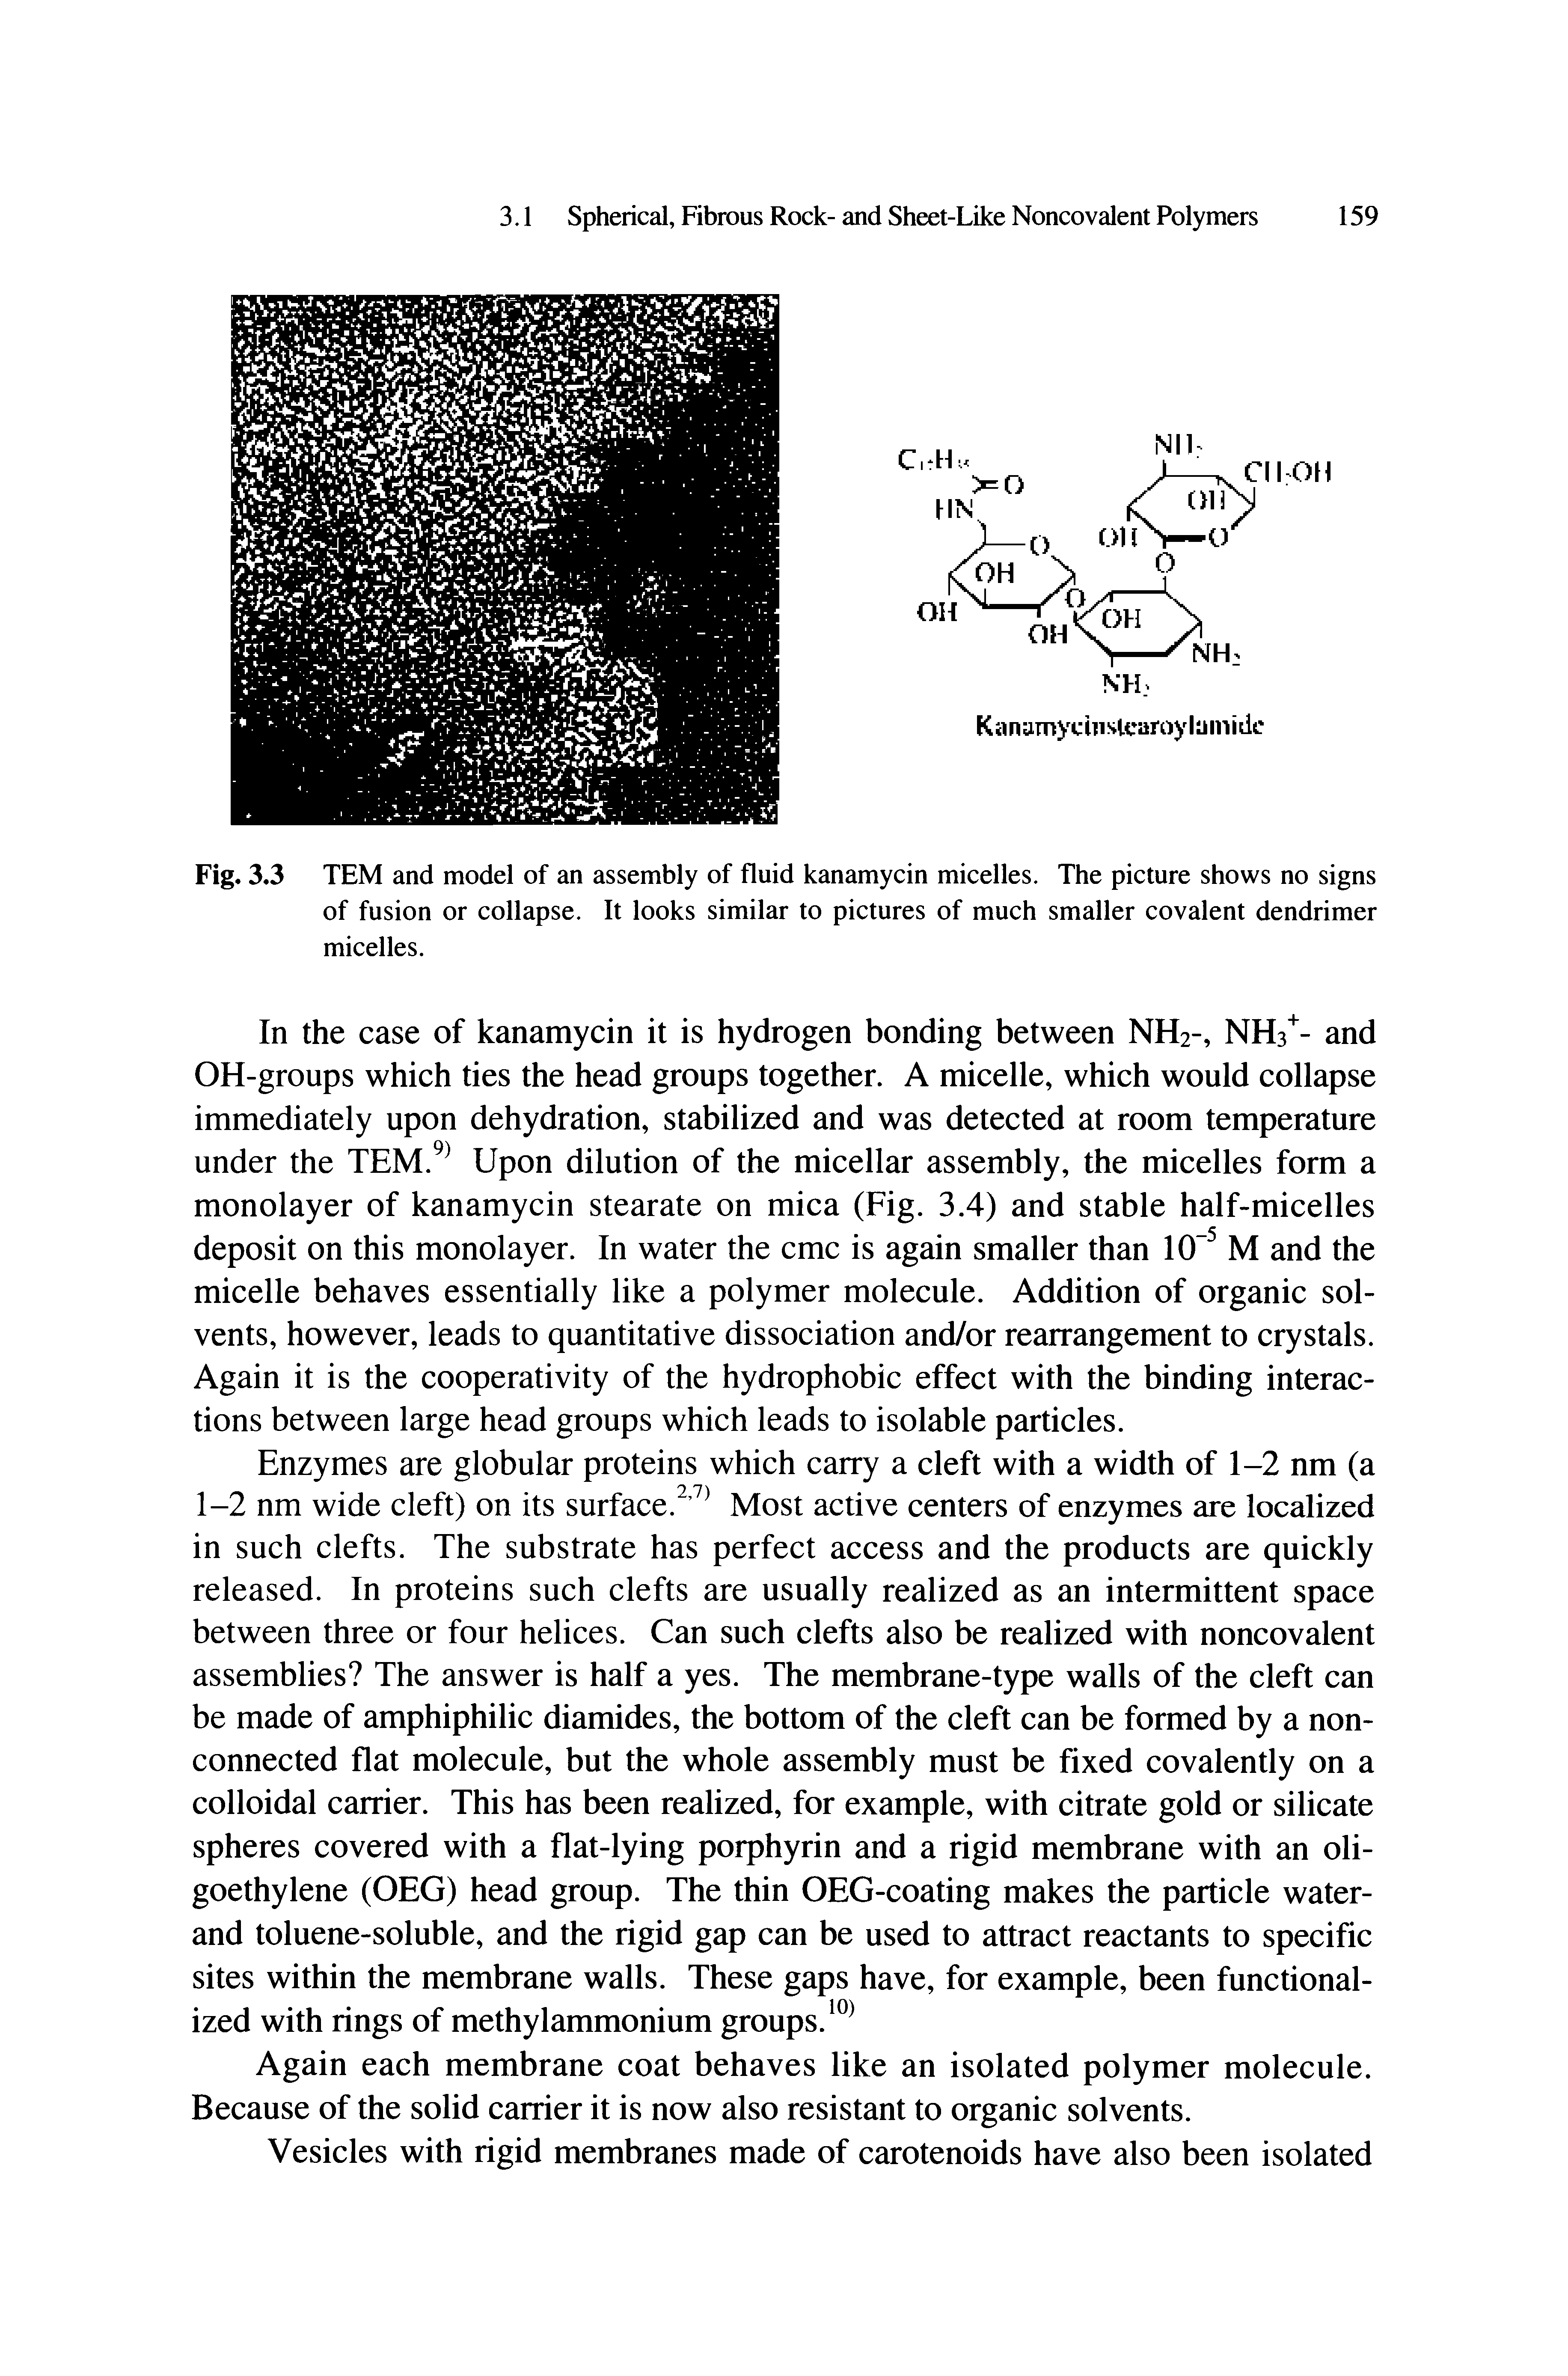 Fig. 3.3 TEM and model of an assembly of fluid kanamycin micelles. The picture shows no signs of fusion or collapse. It looks similar to pictures of much smaller covalent dendrimer micelles.